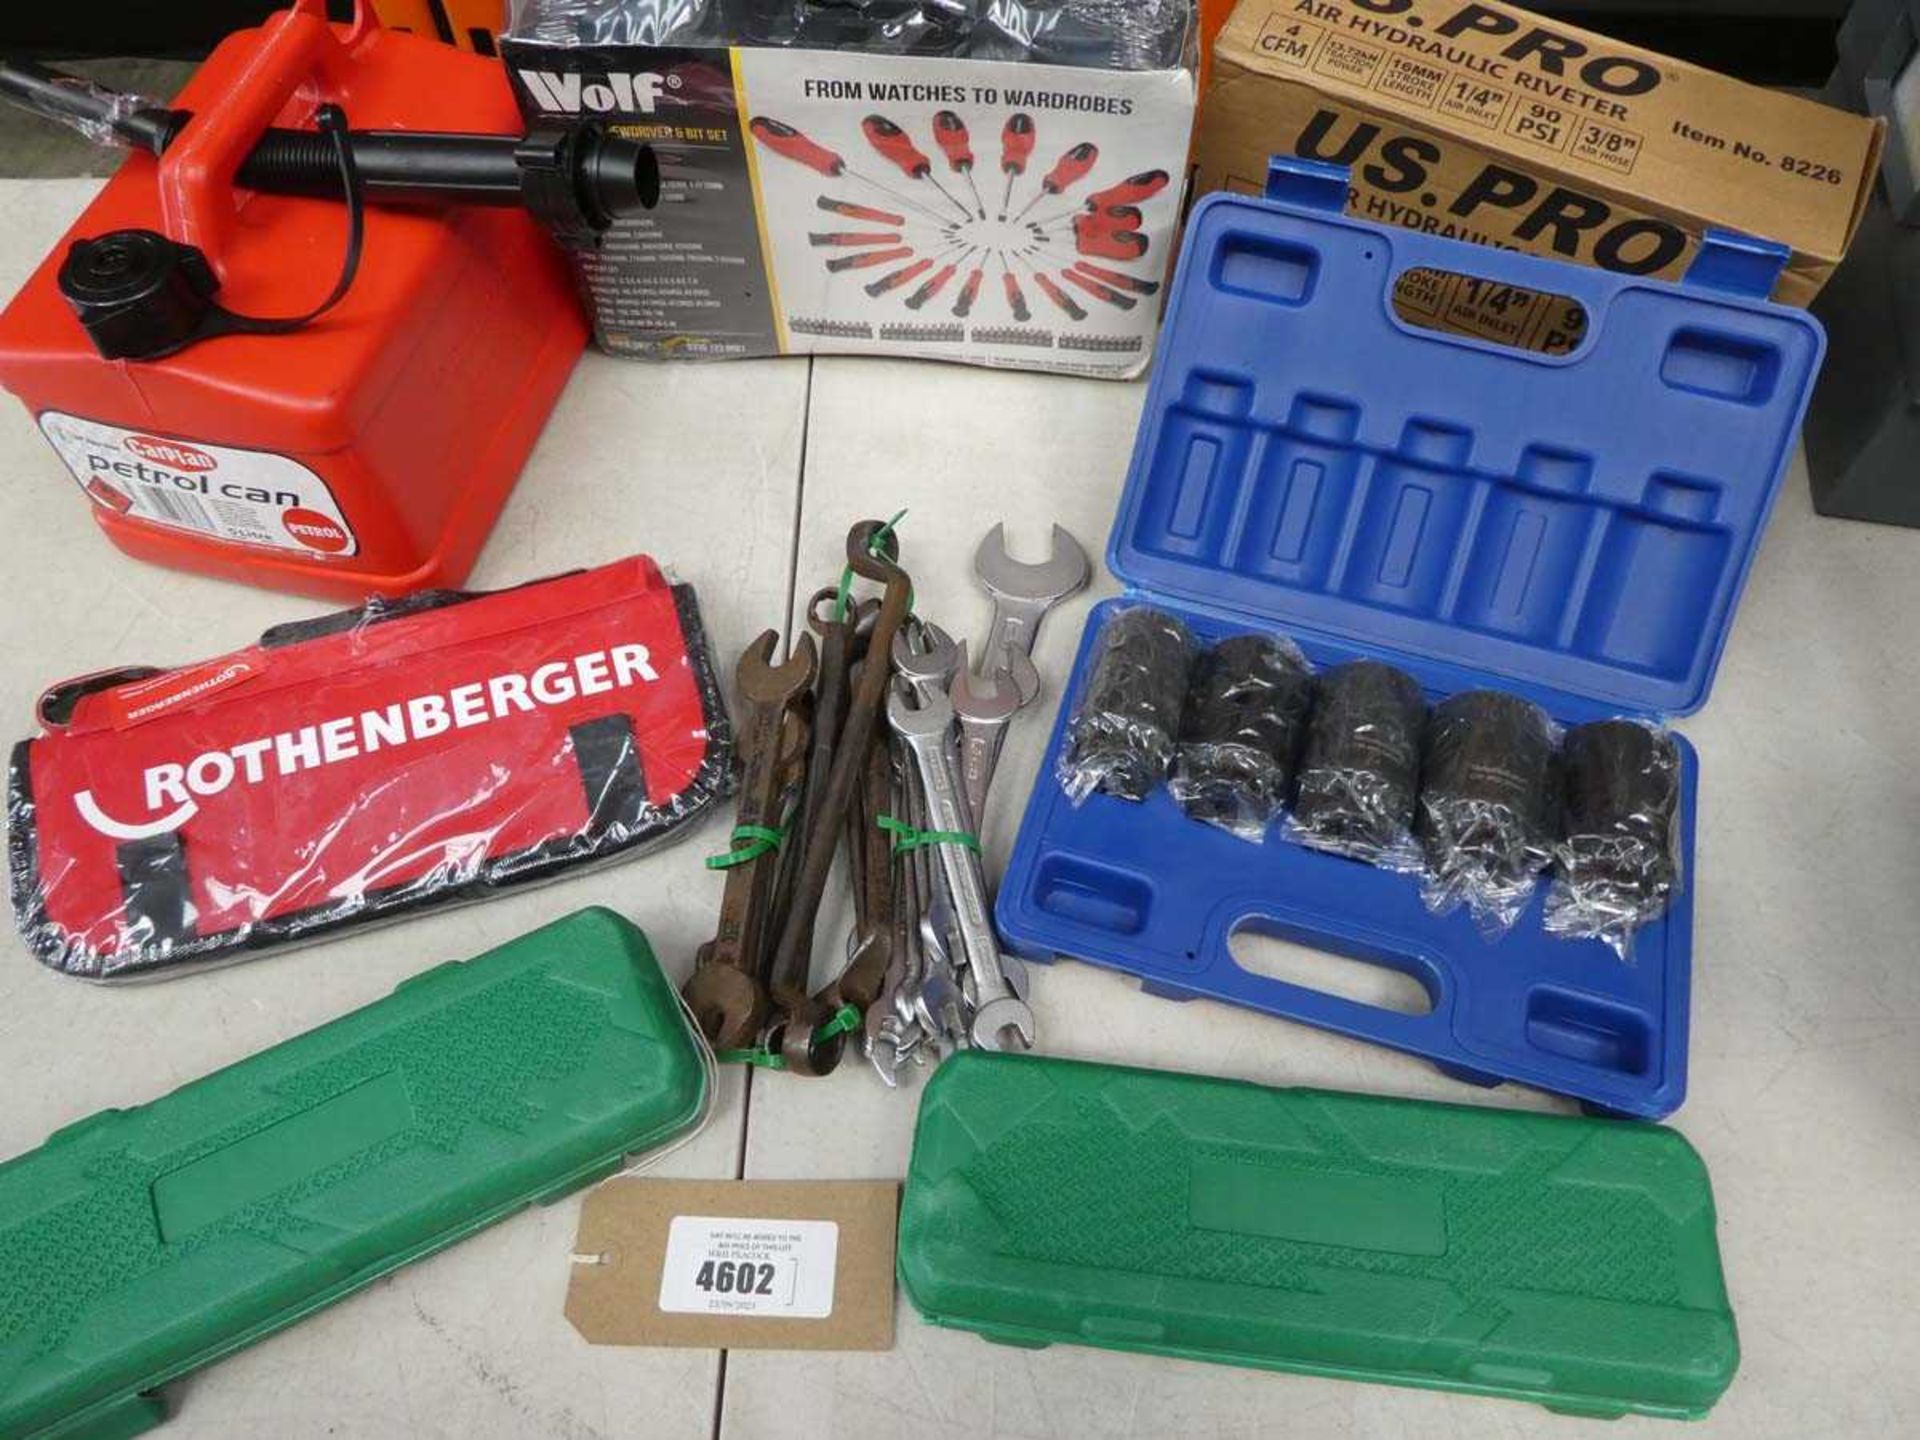 +VAT Bag containing screwdrivers, hydraulic riveter, sockets, petrol pan and spanners